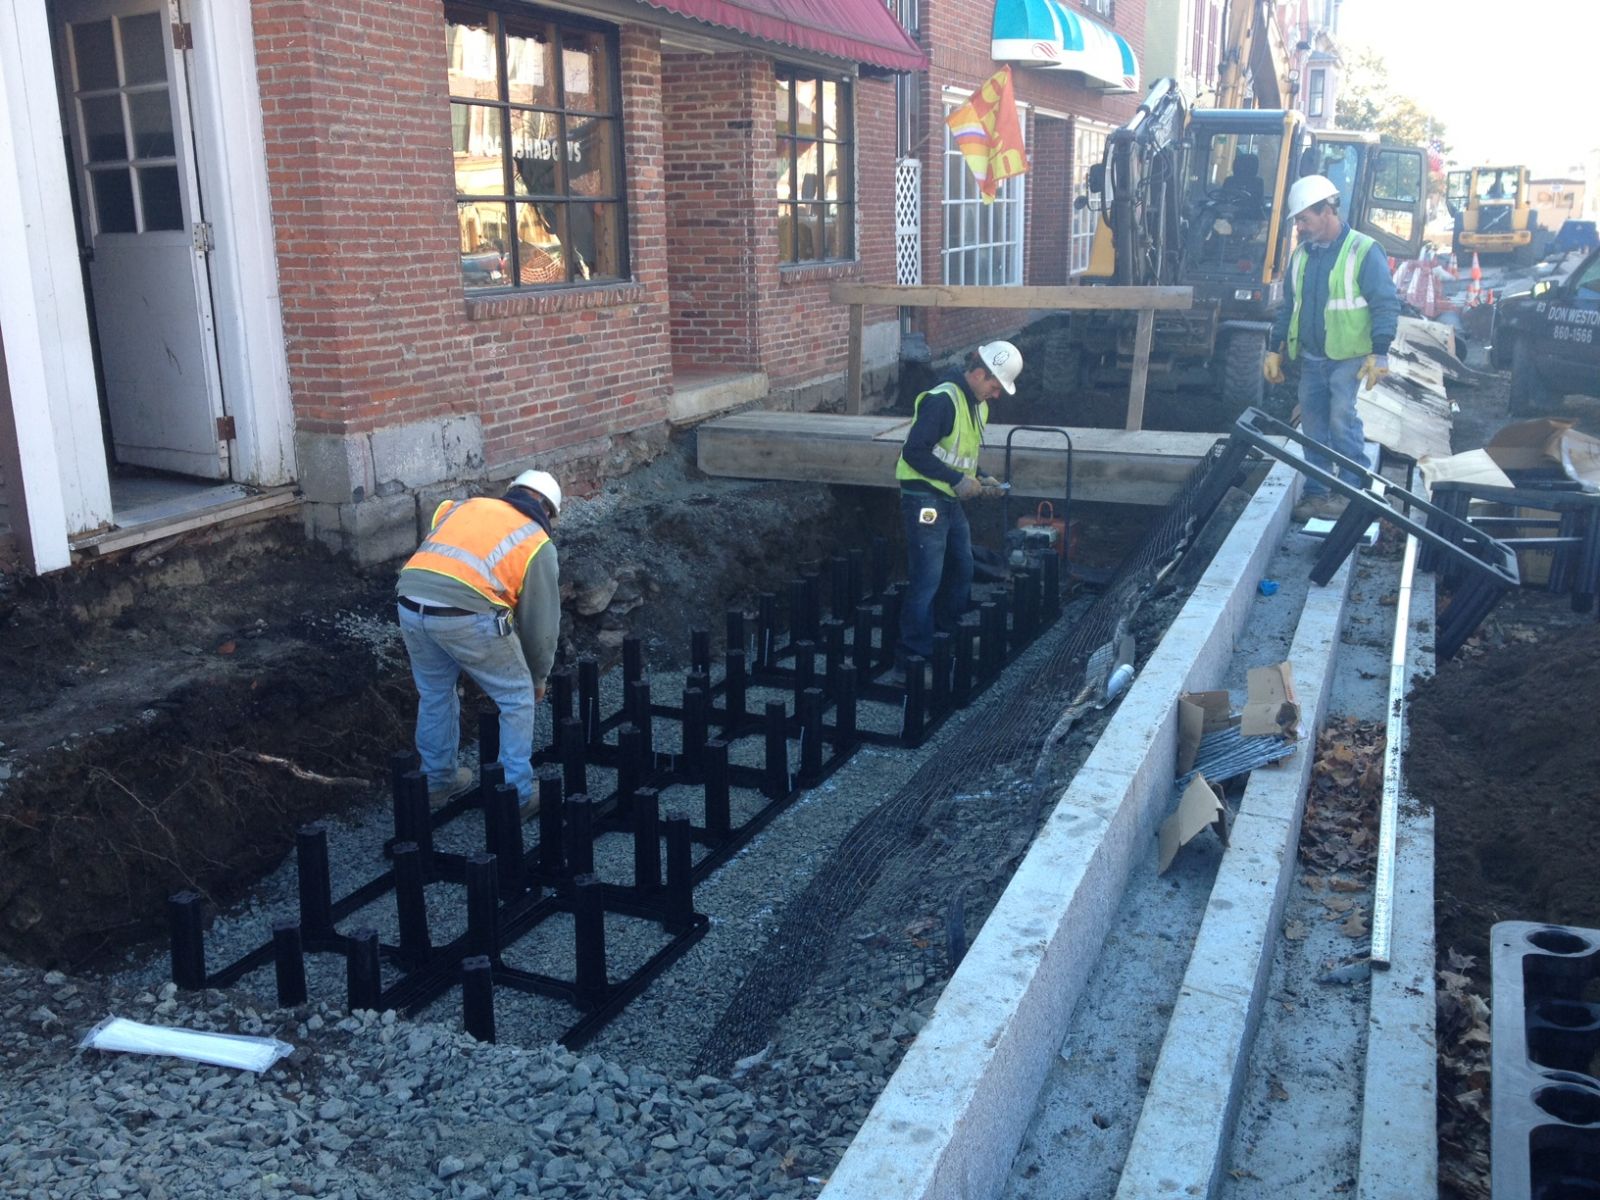 soils cells being installed in downtown St. Albans